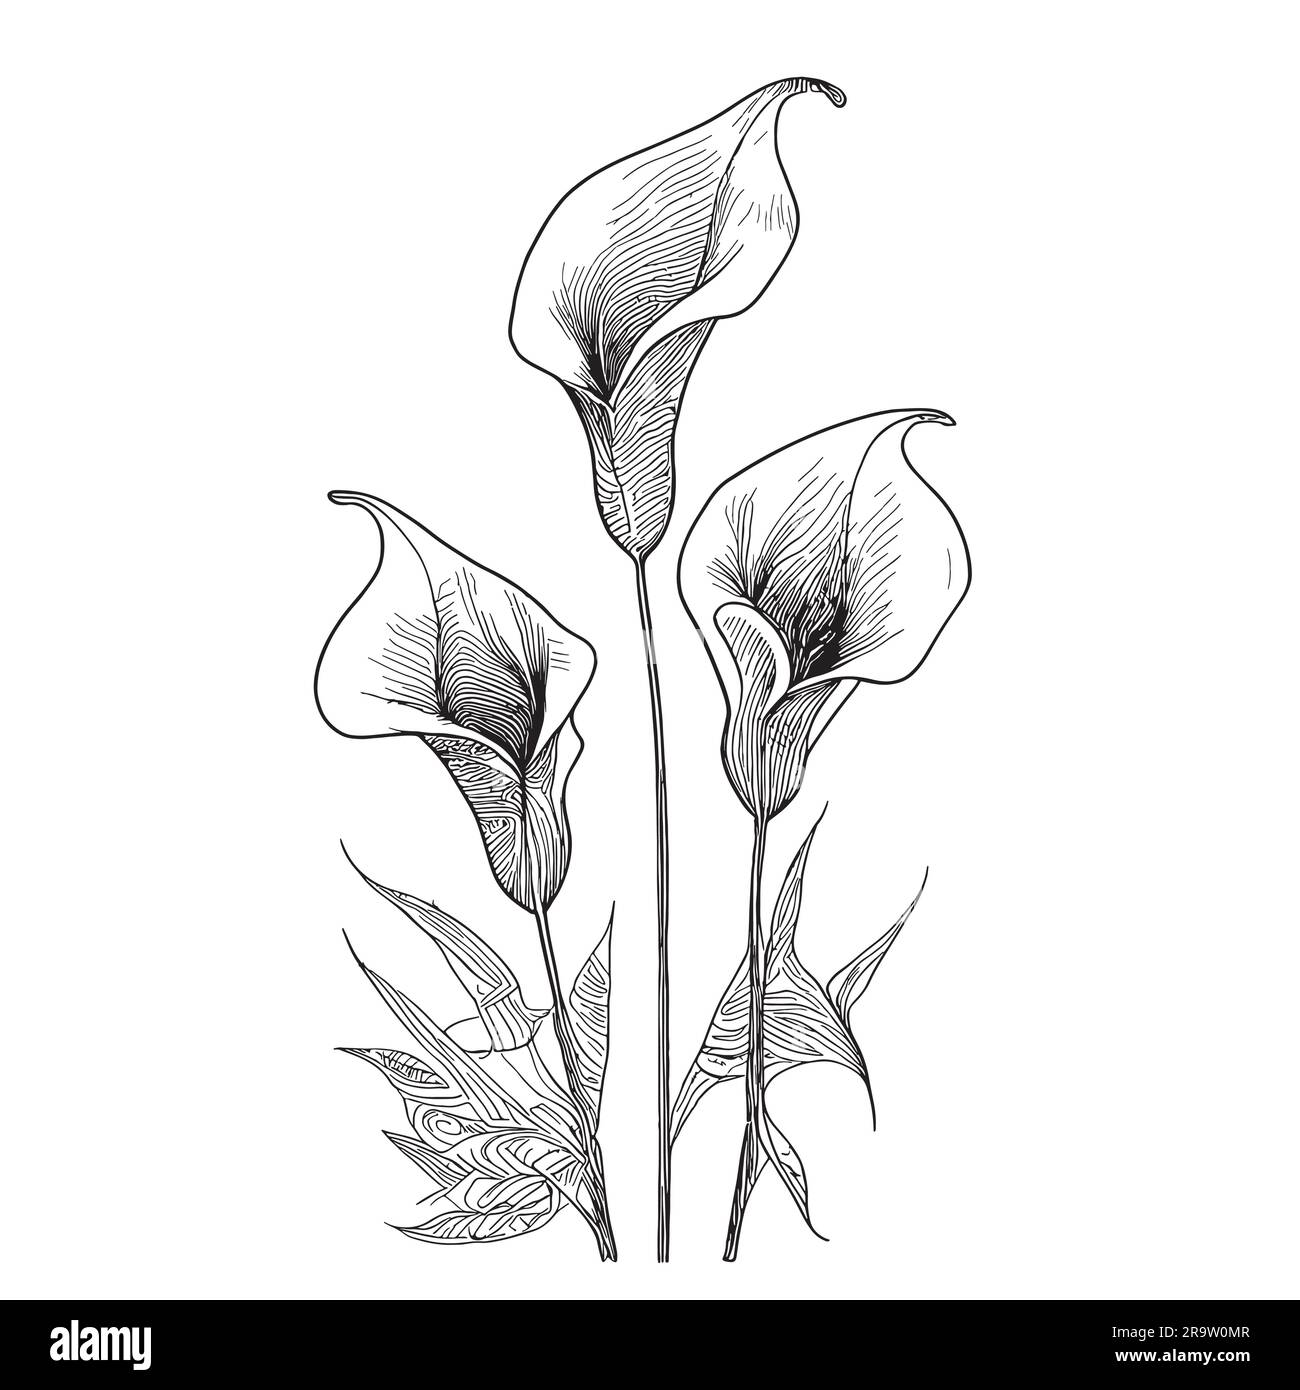 Calla lilies hand drawn sketch in doodle style Flowers Stock Vector